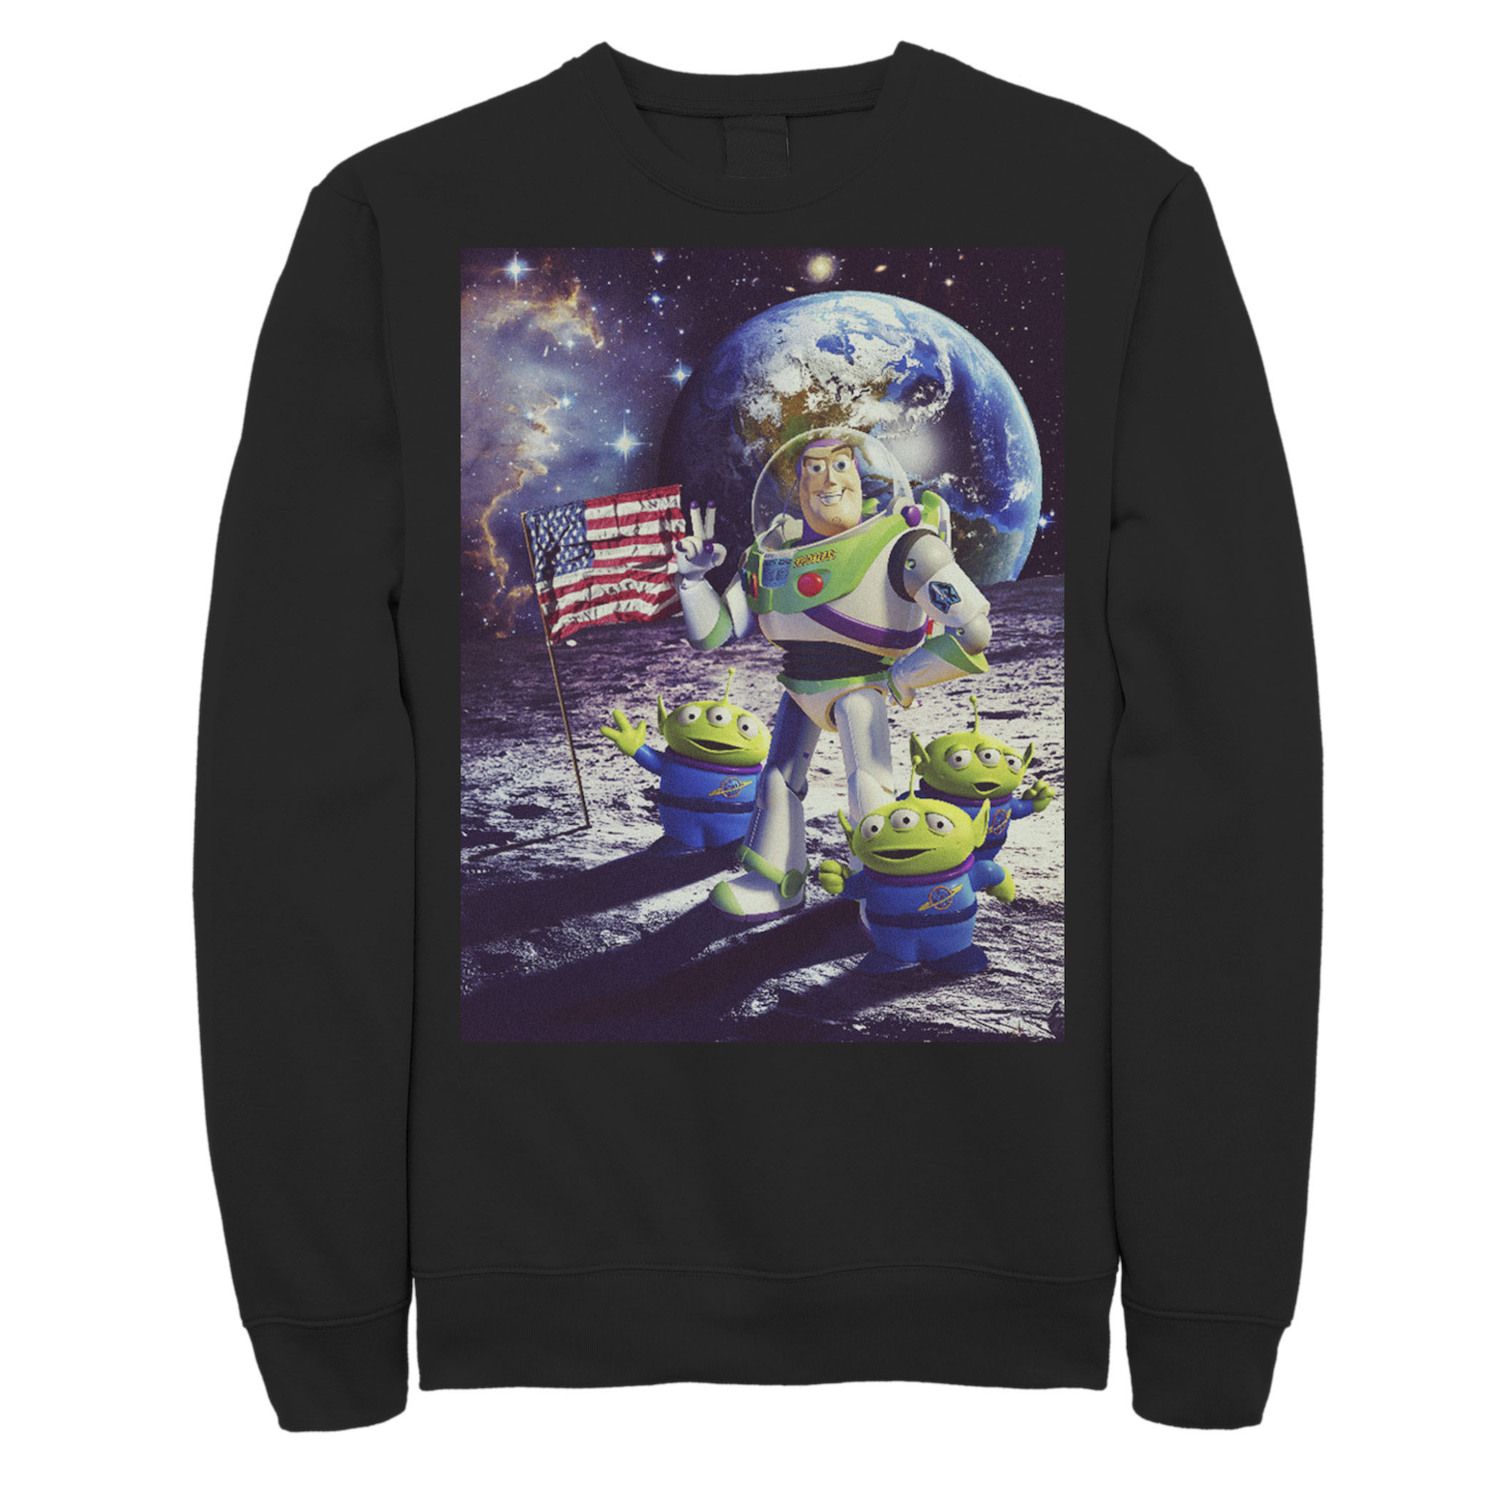 Image for Disney / Pixar Men's Toy Story Buzz and Aliens On The Moon Photo Sweatshirt at Kohl's.